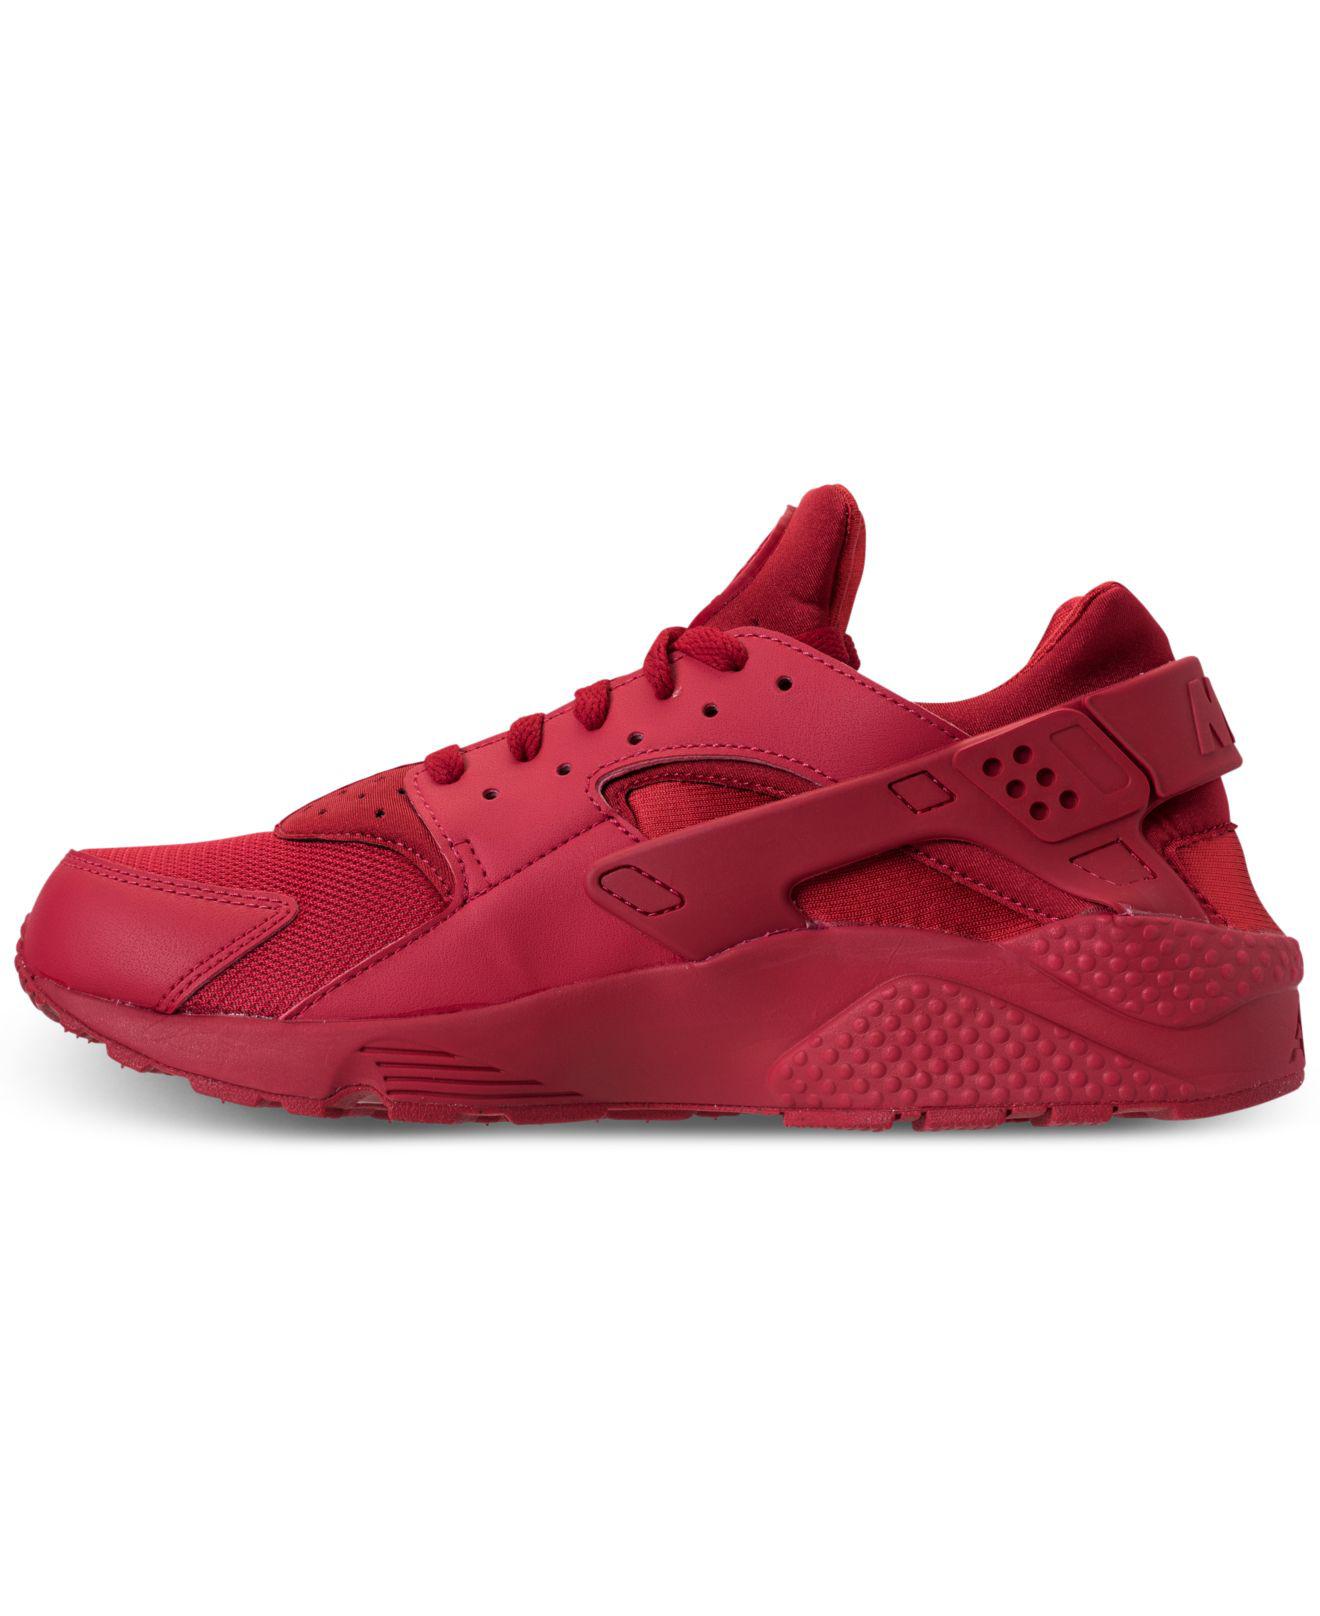 Nike Neoprene Air Huarache - Running Shoes in Red/Red (Red) - Save 69% -  Lyst